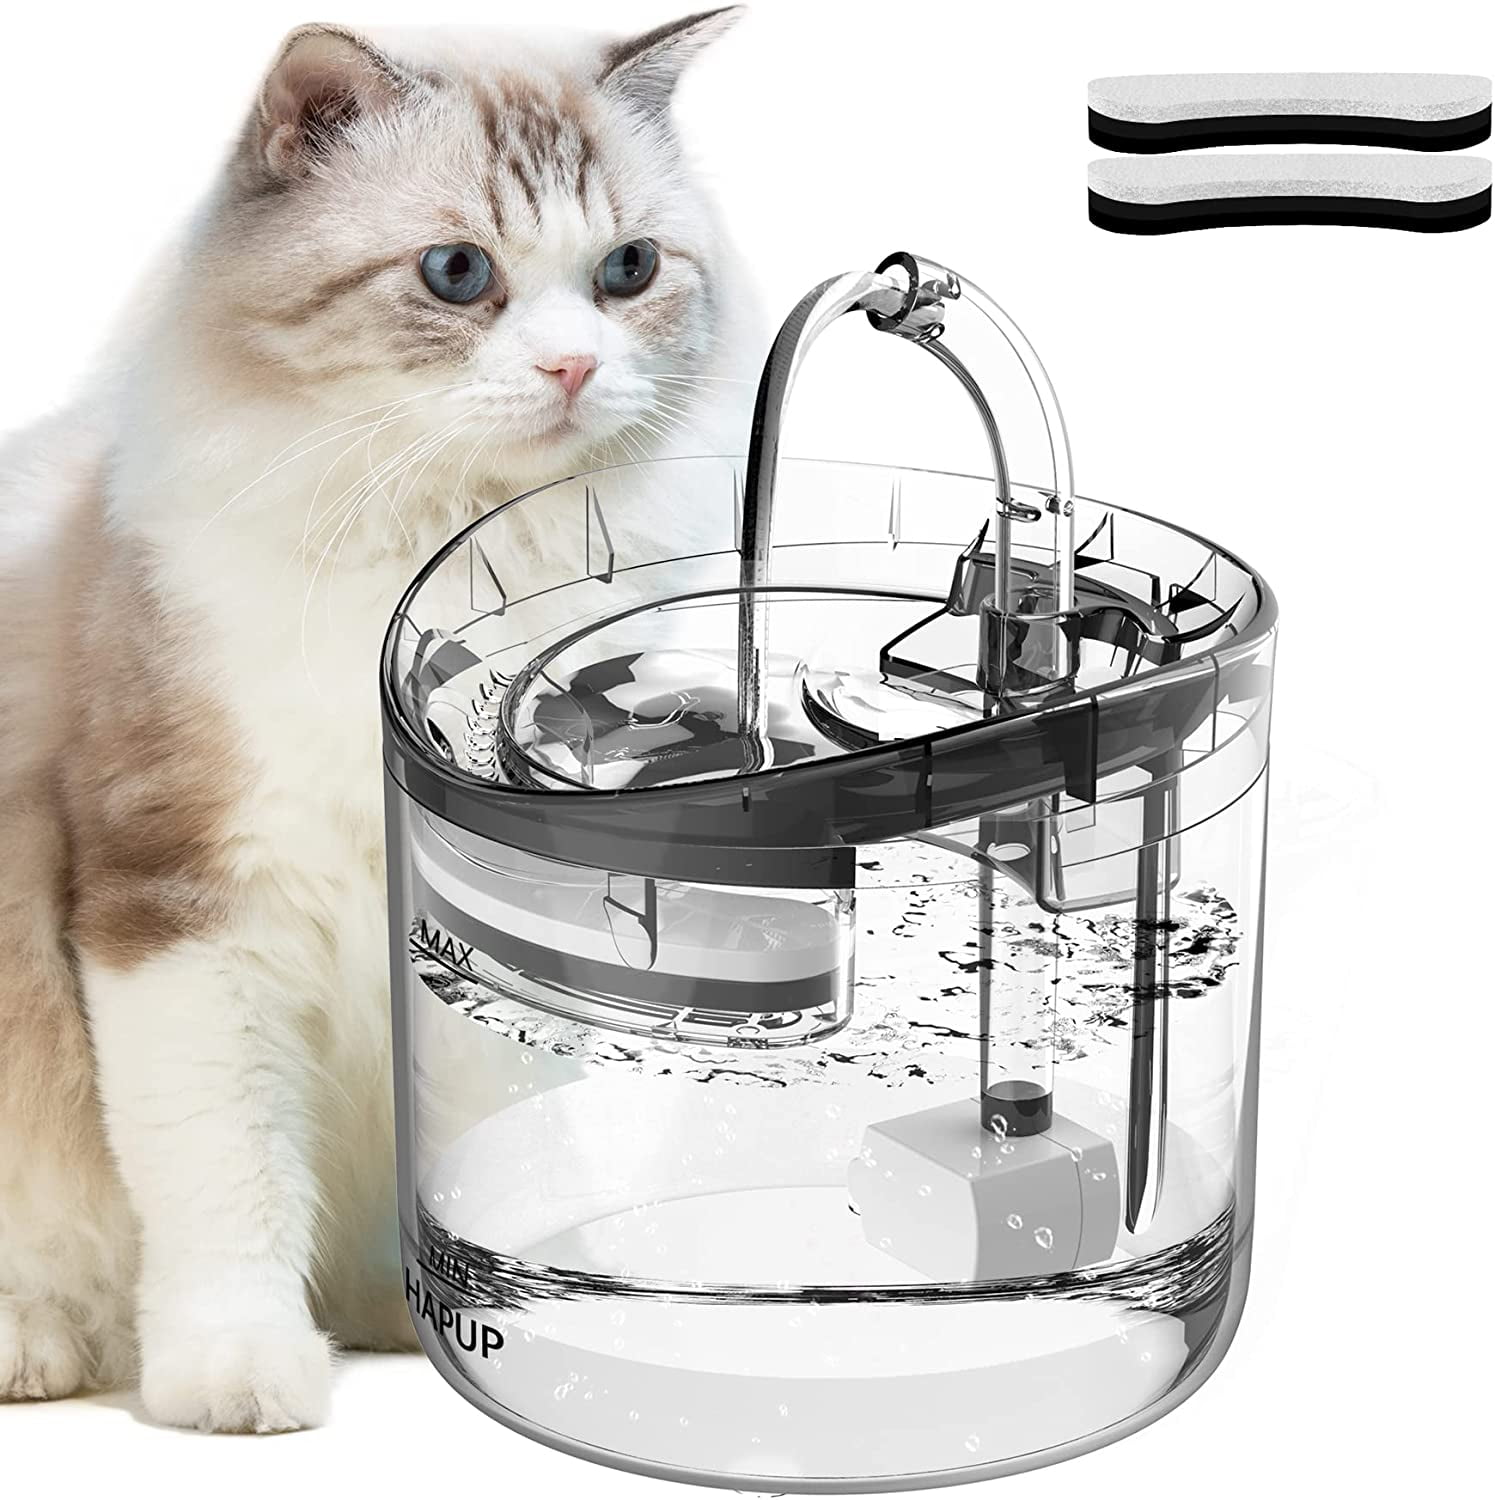 Cat Water Fountain Filter Replacement Upgrade Cat Fountain Filter Arc-Shaped Safe Washable Animal Water Fountain Filters with 4 Filtration System for HAPUP Dog Kitty Spout Cat Fountain 